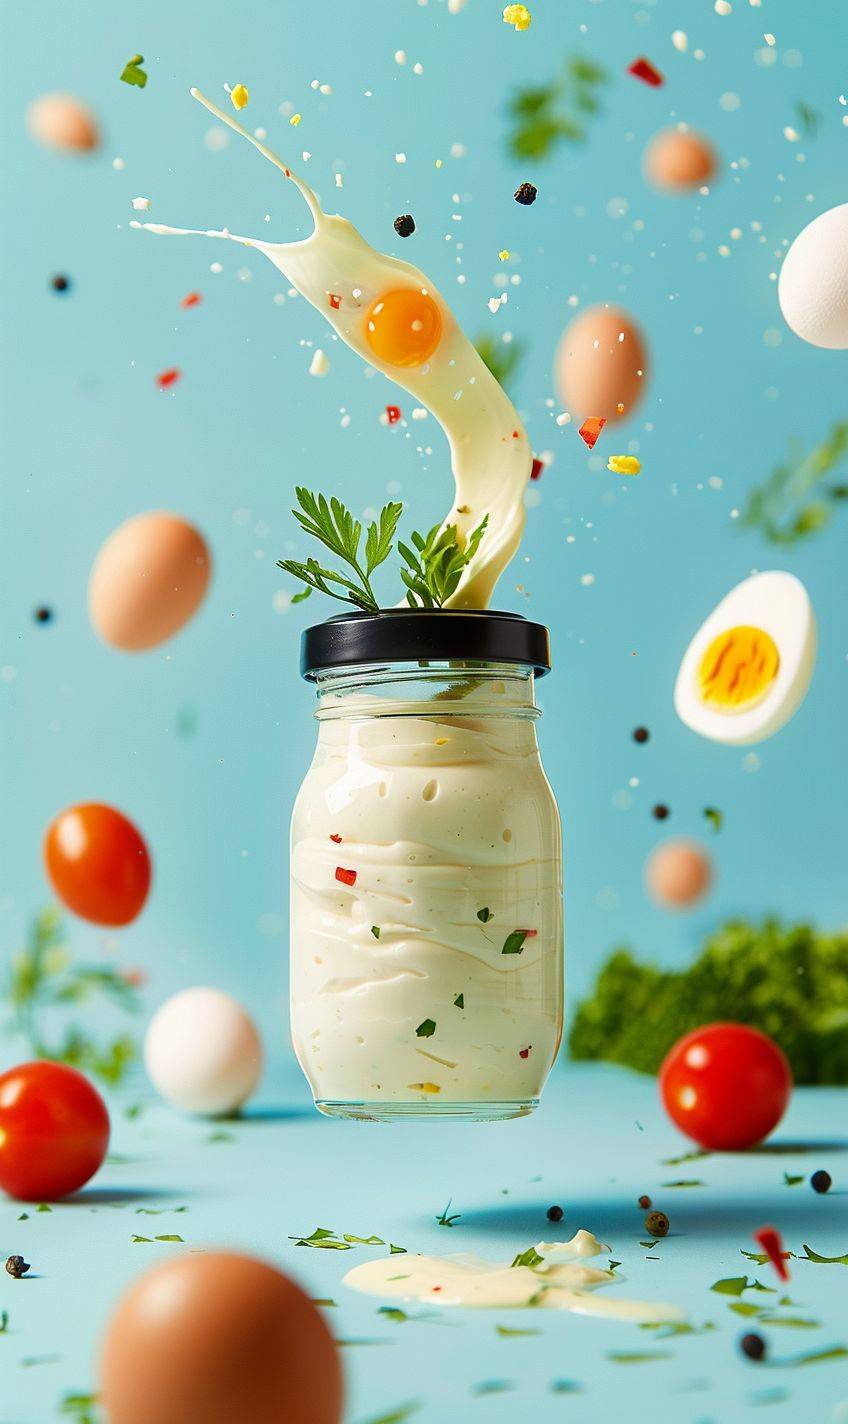 Large glass jar with mayonnaise with a black lid in flight. blue background. Eggs and vegetables are flying around. Realistic photo. Soft light. Studio light.